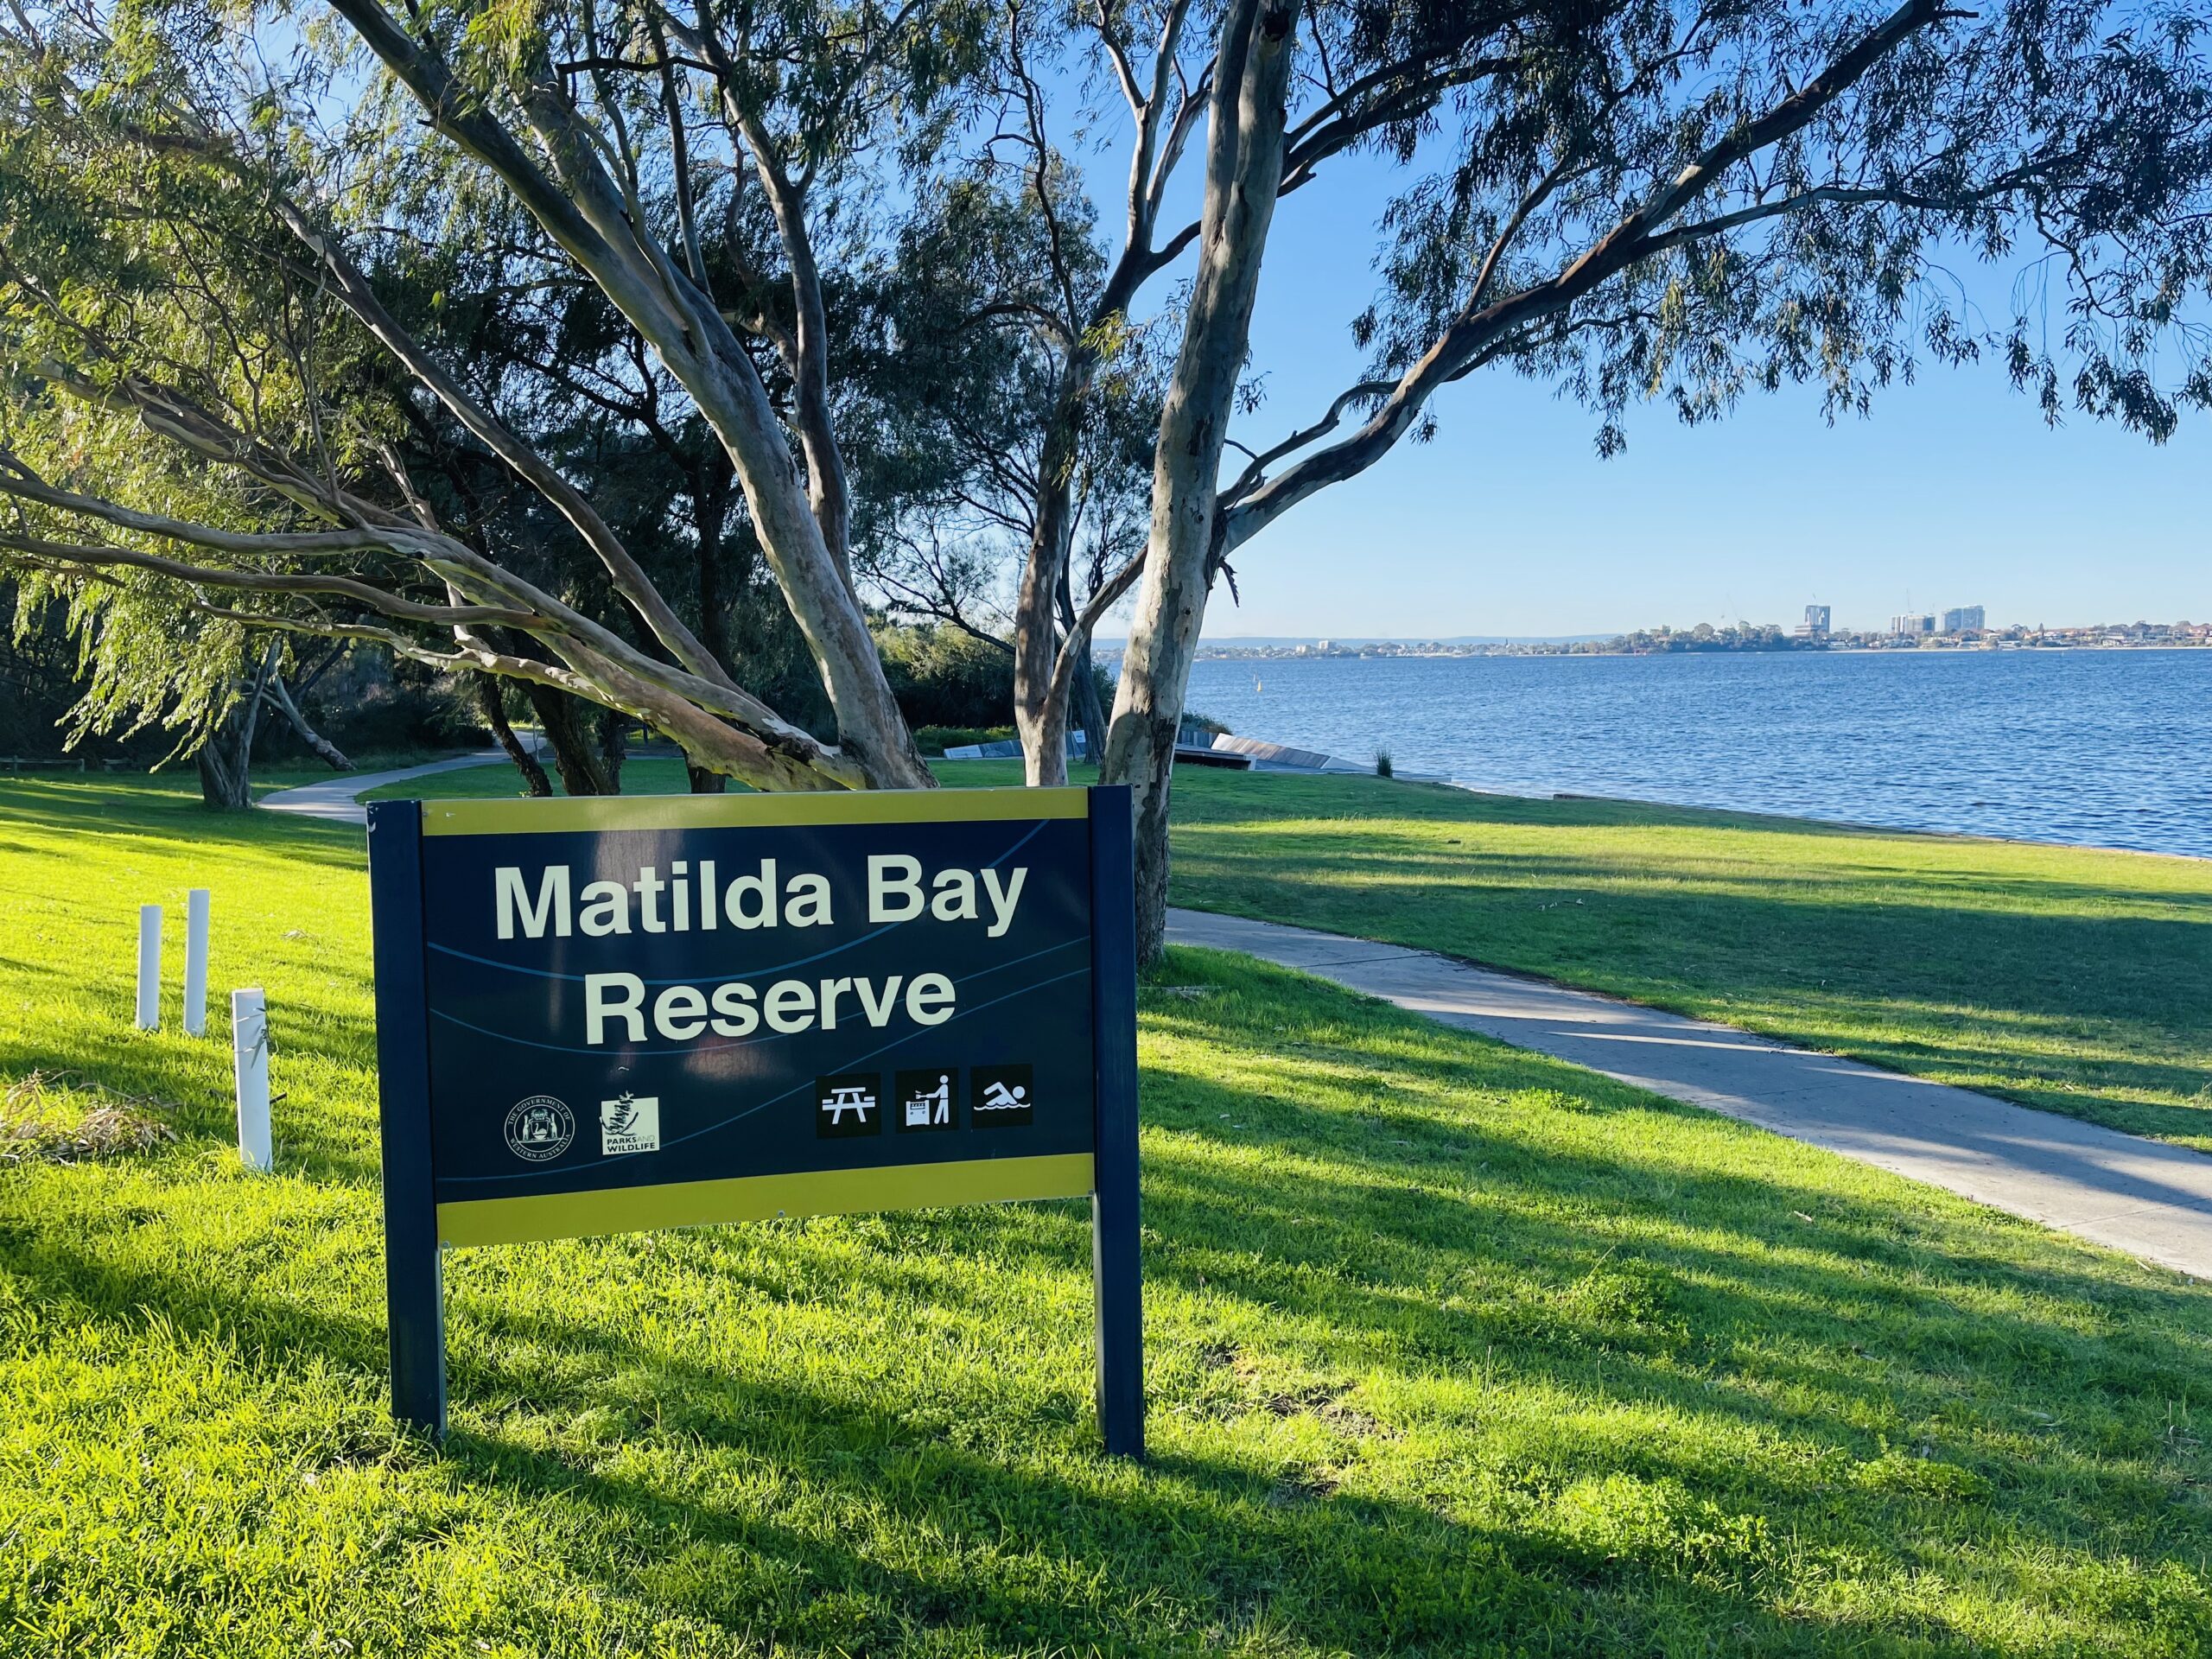 The focus of this photo is a large sign that reads “Matilda Bay Reserve” in the left of the image. Behind and to the right of the sign is some green grass, and a concrete path. Some large trees and the blue Swan River can be seen in the distance. The sky above is clear and blue.